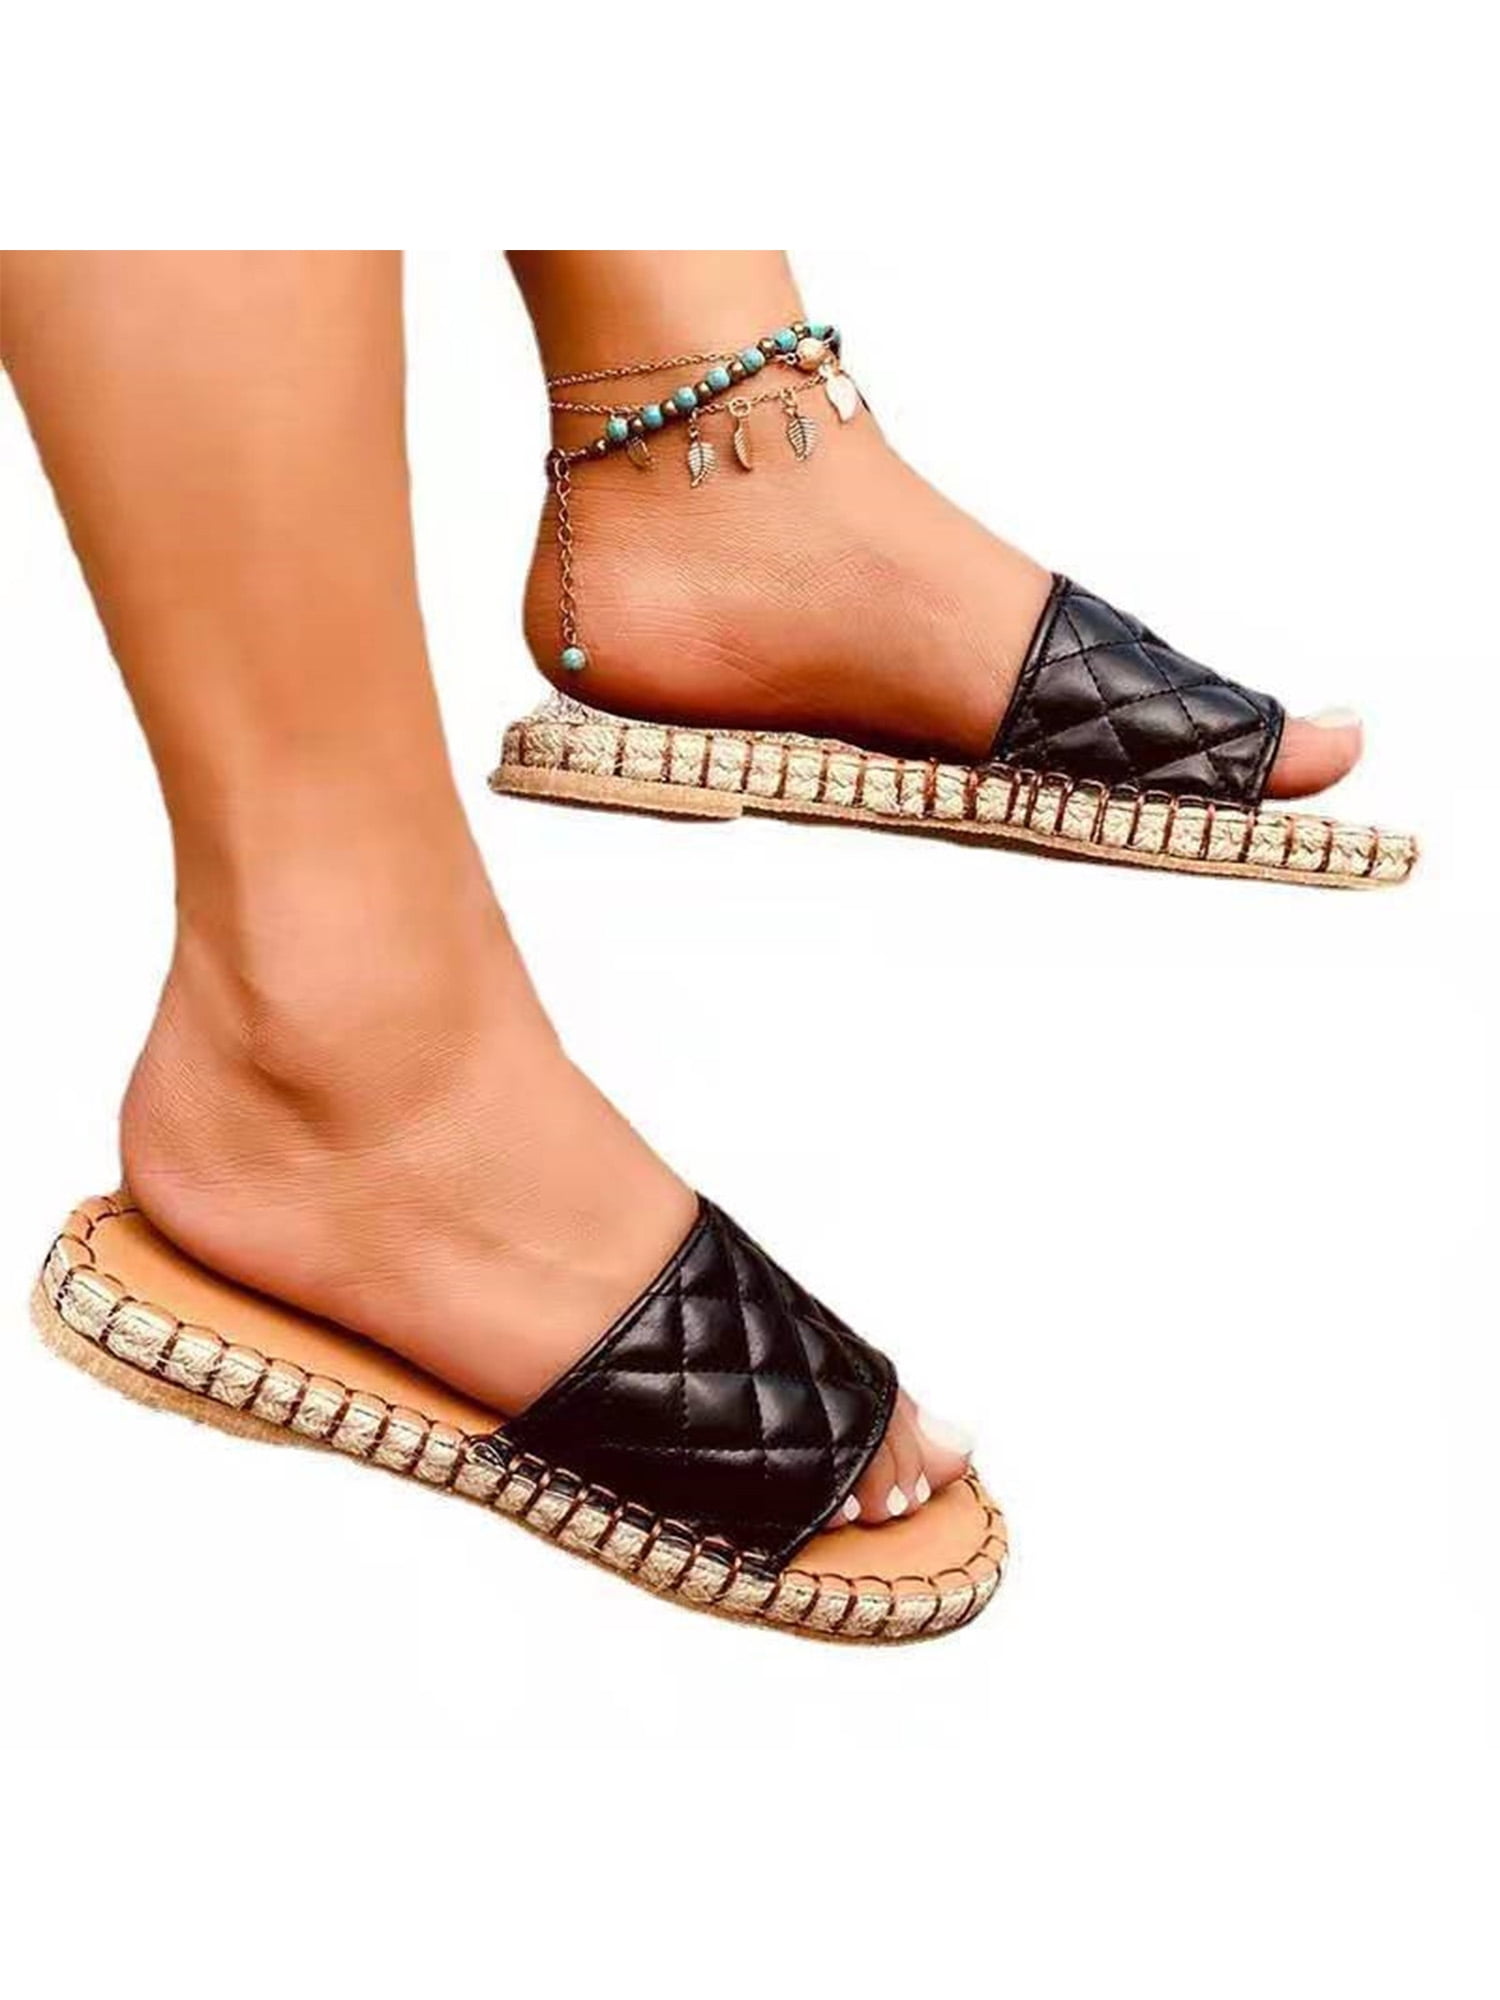 NEW WOMENS LADIES FLAT SLIP ON MULE SUMMER STUDS STUDDED CAGE SANDALS SHOES SIZE 